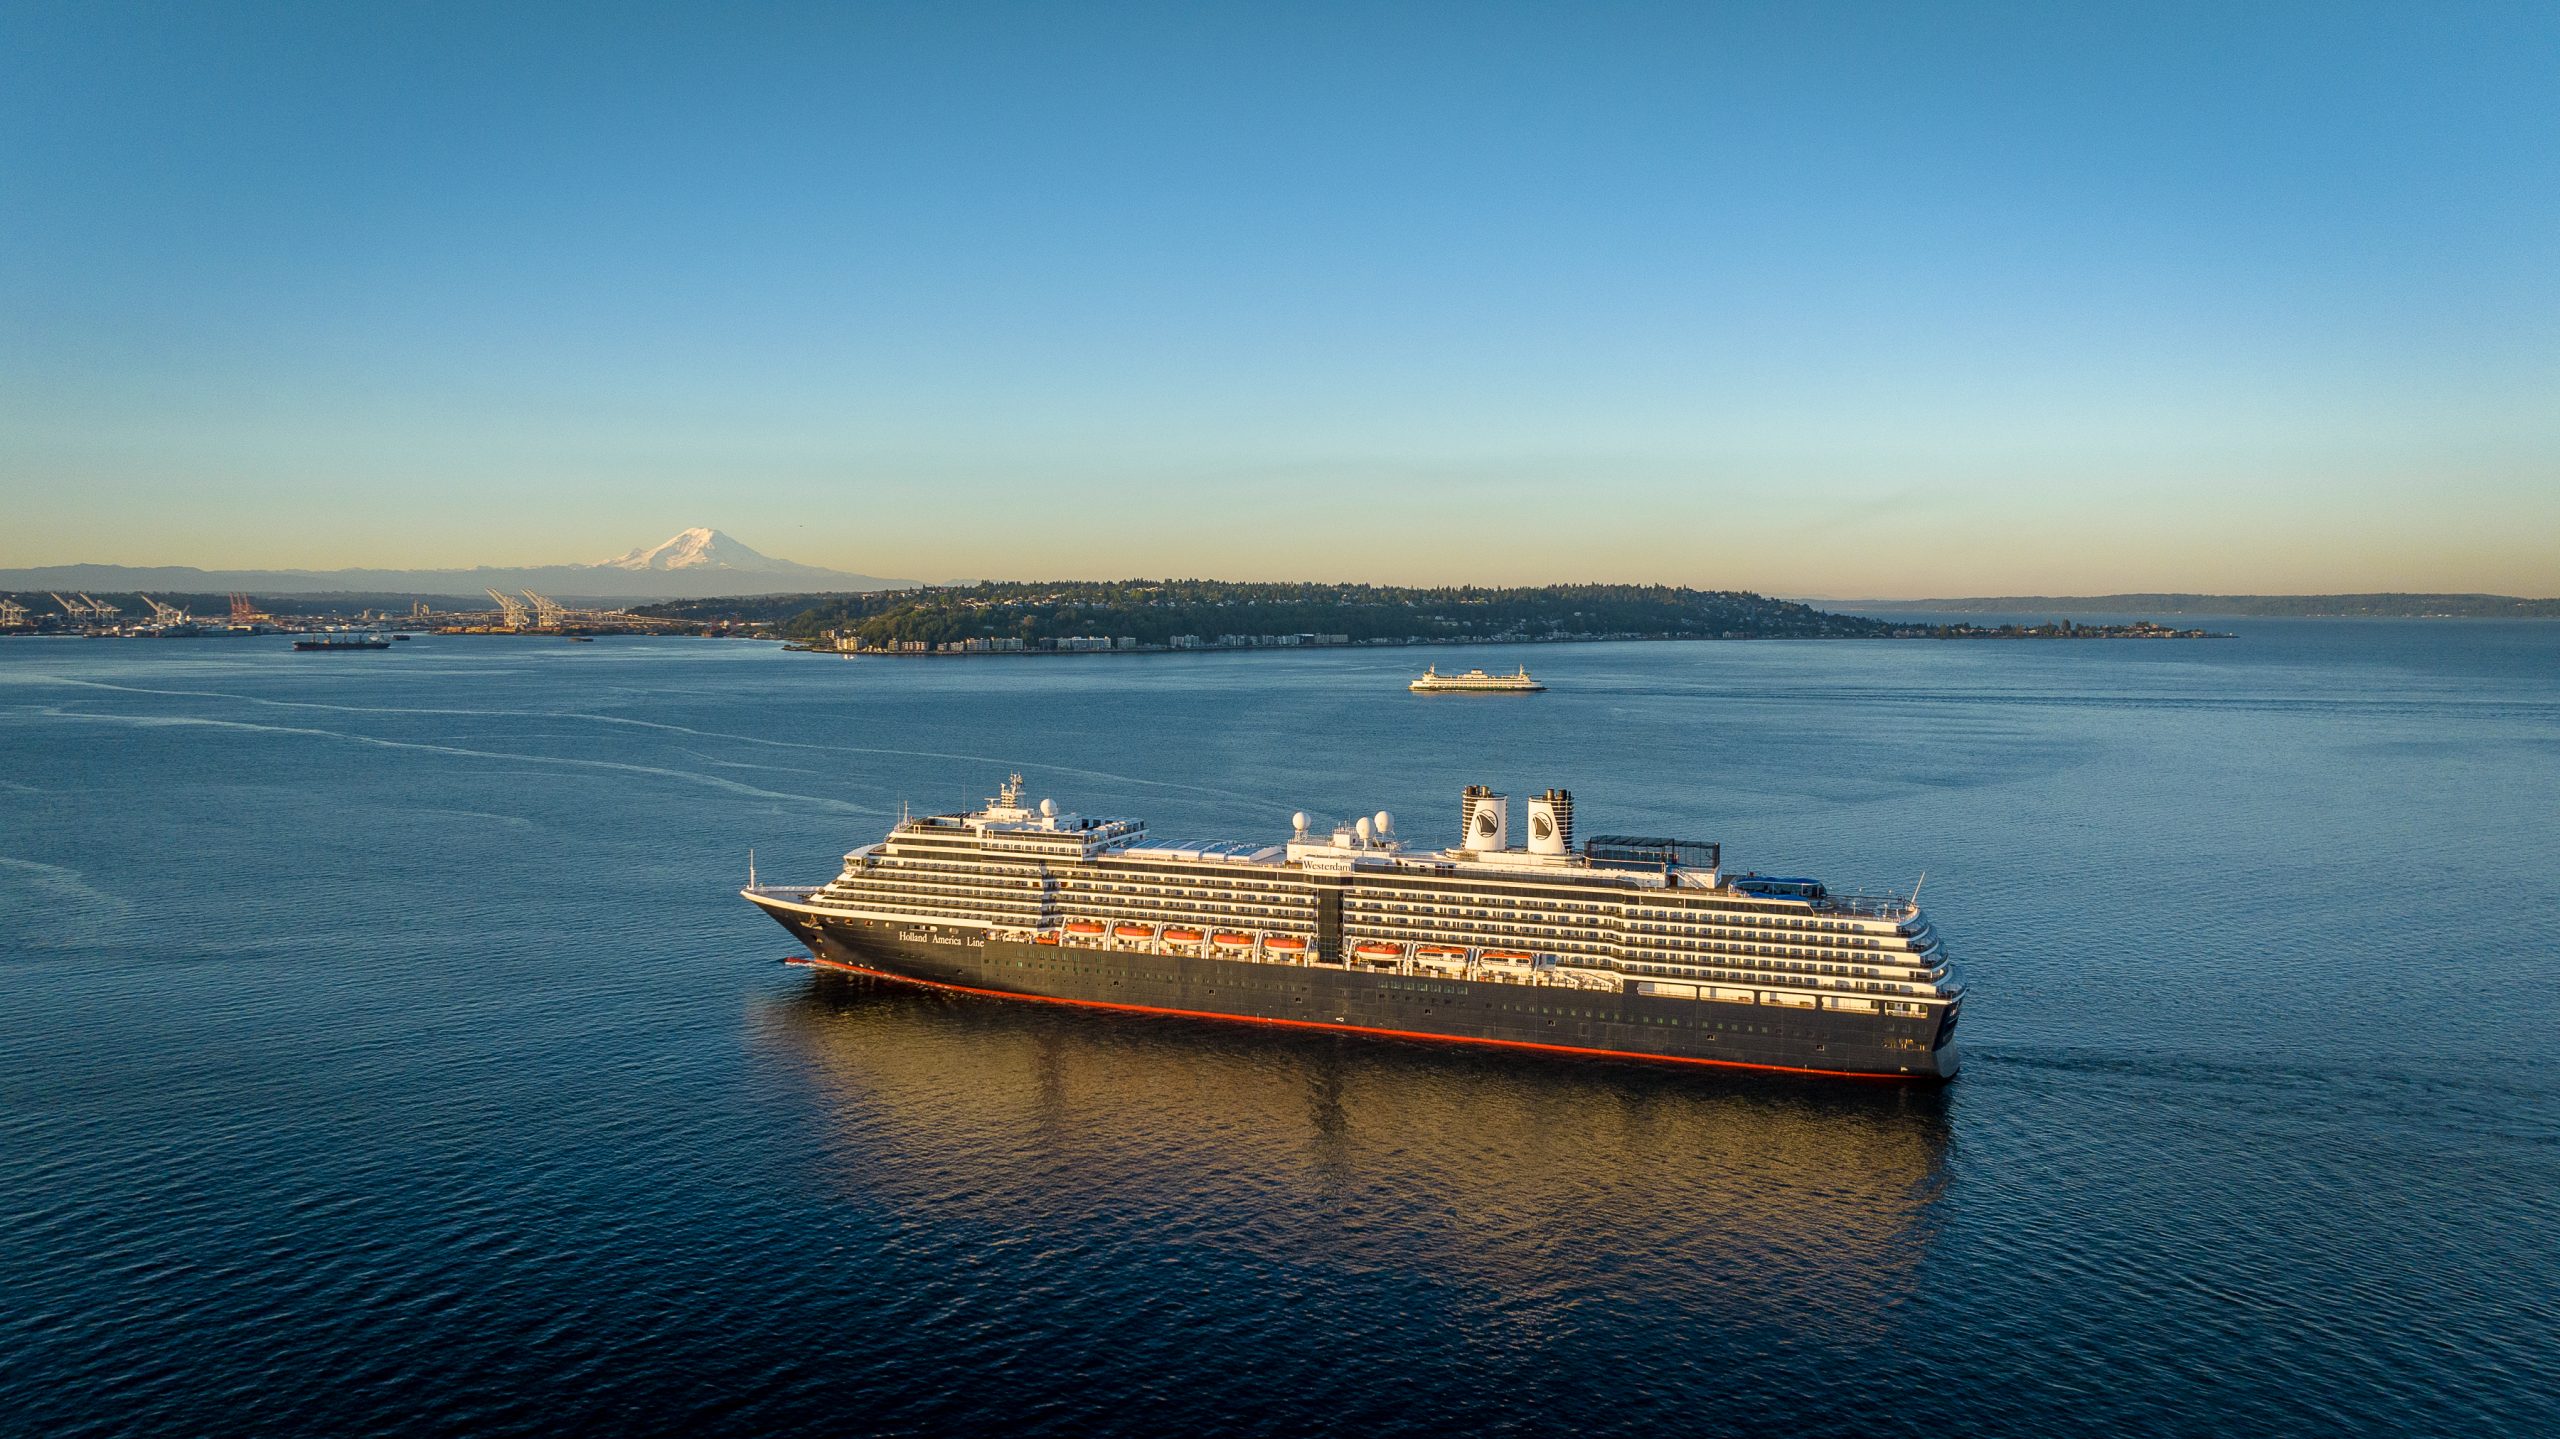 Holland America Cruise Line Launches Partnership with AARP to Give Free Cruise Credits